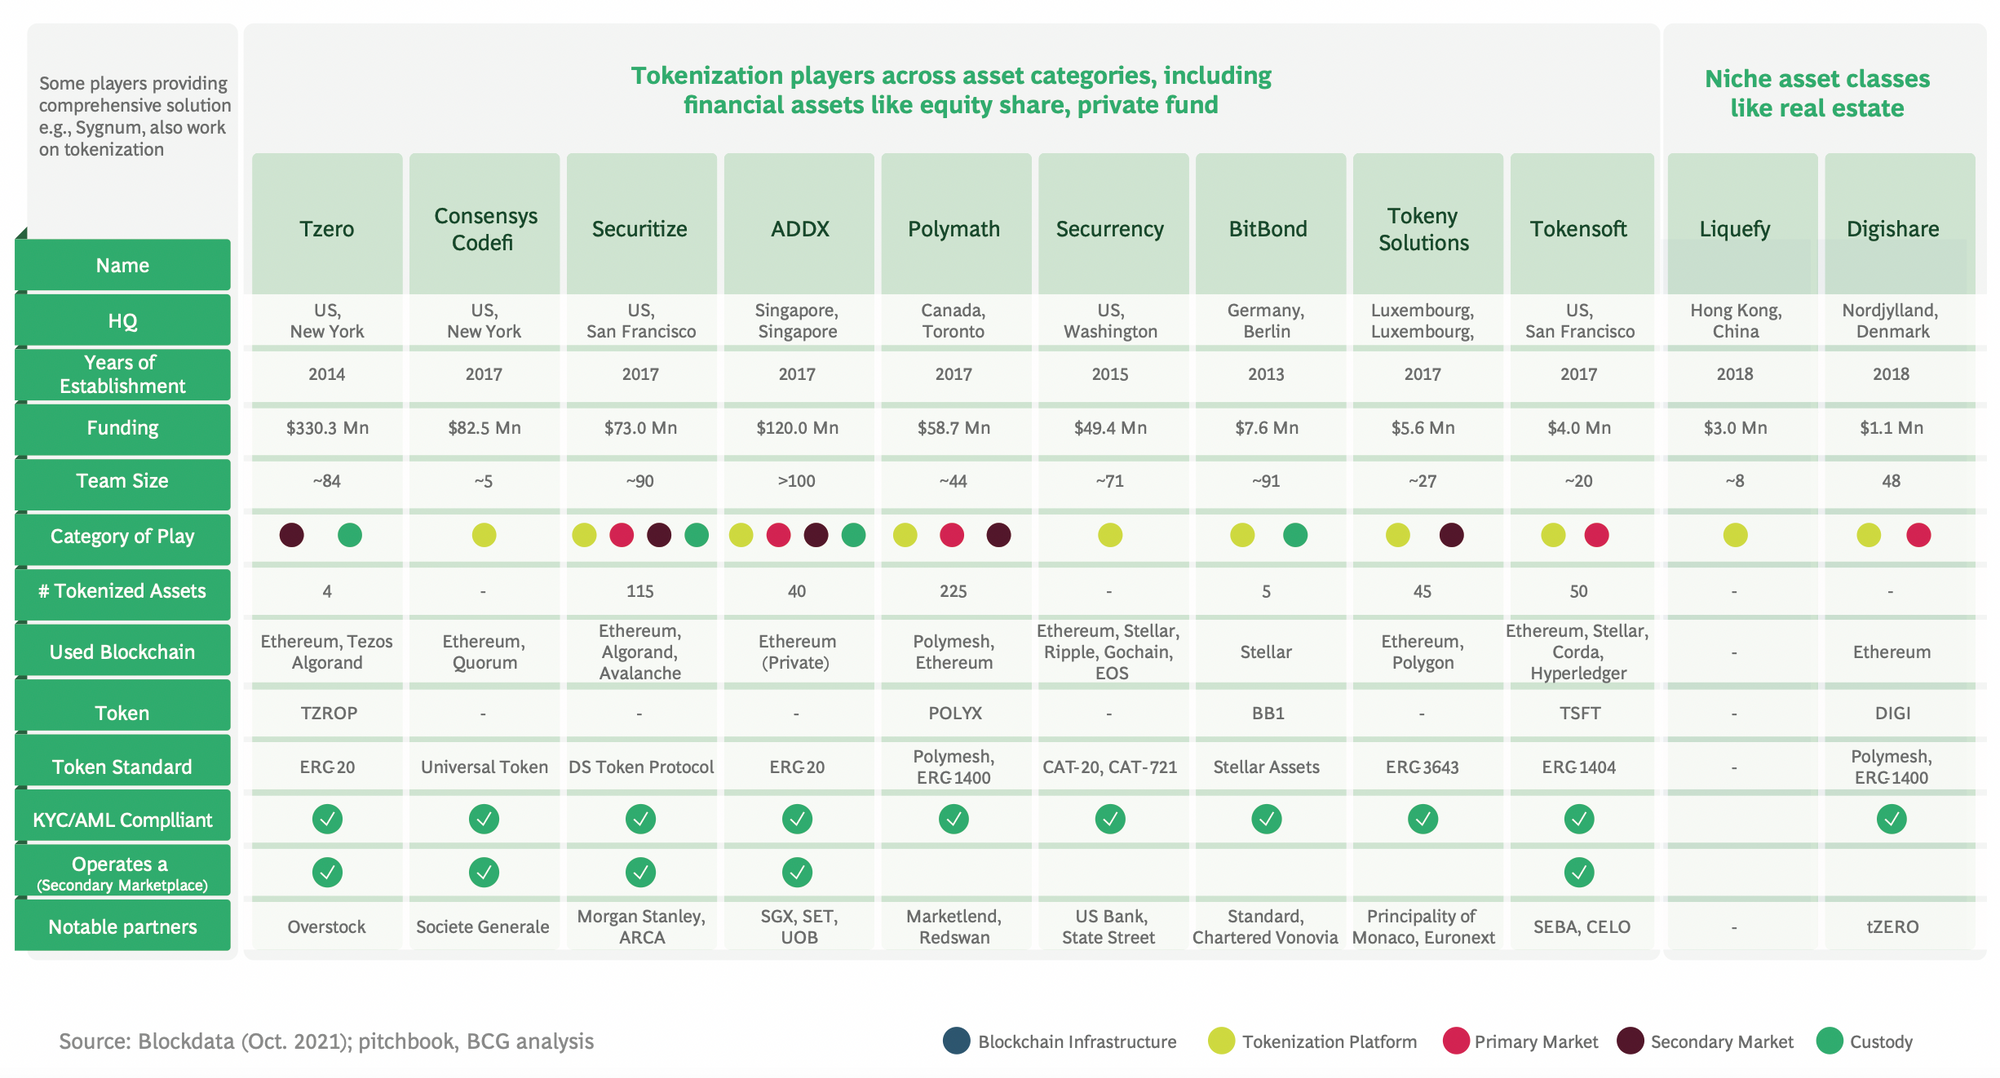 Range of emerging on-chain tokenization players. Source: “Relevance of on-chain asset tokenization in crypto winter” by BCG and ADDX.